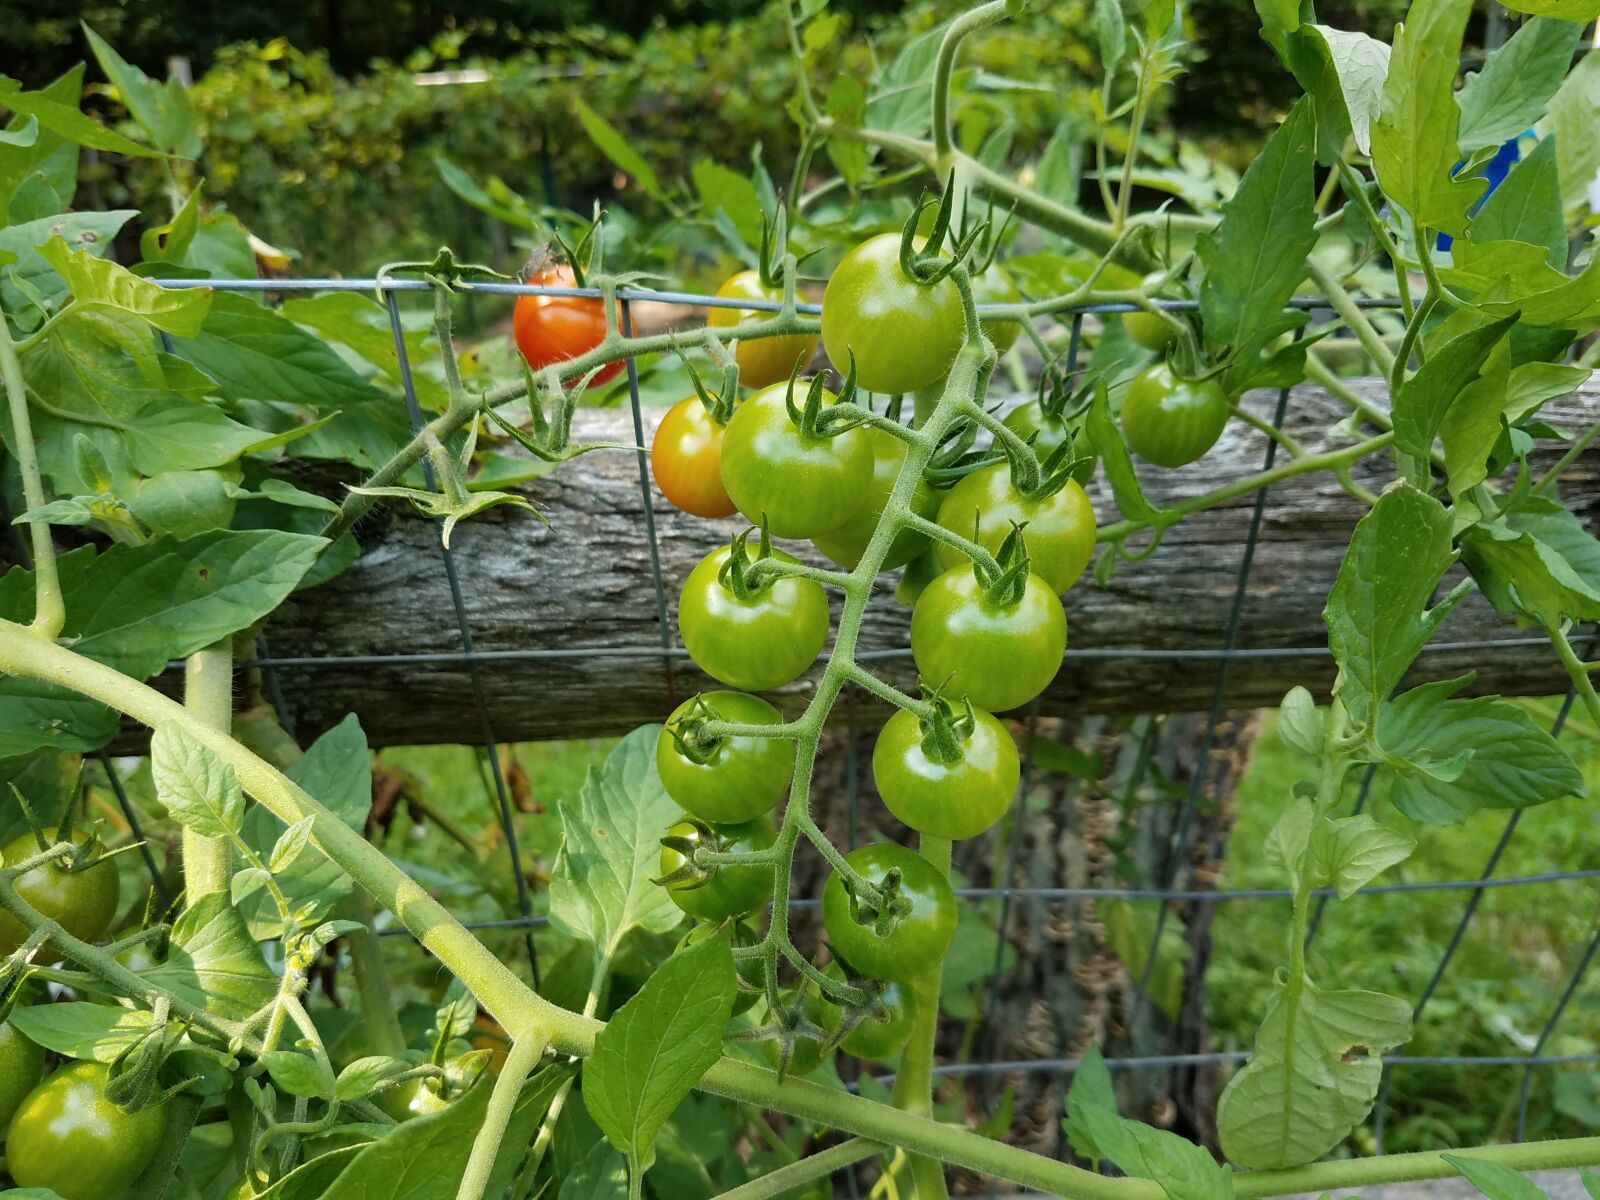 Samsung Galaxy S7 sample photo. Tomatoes, green, red photography